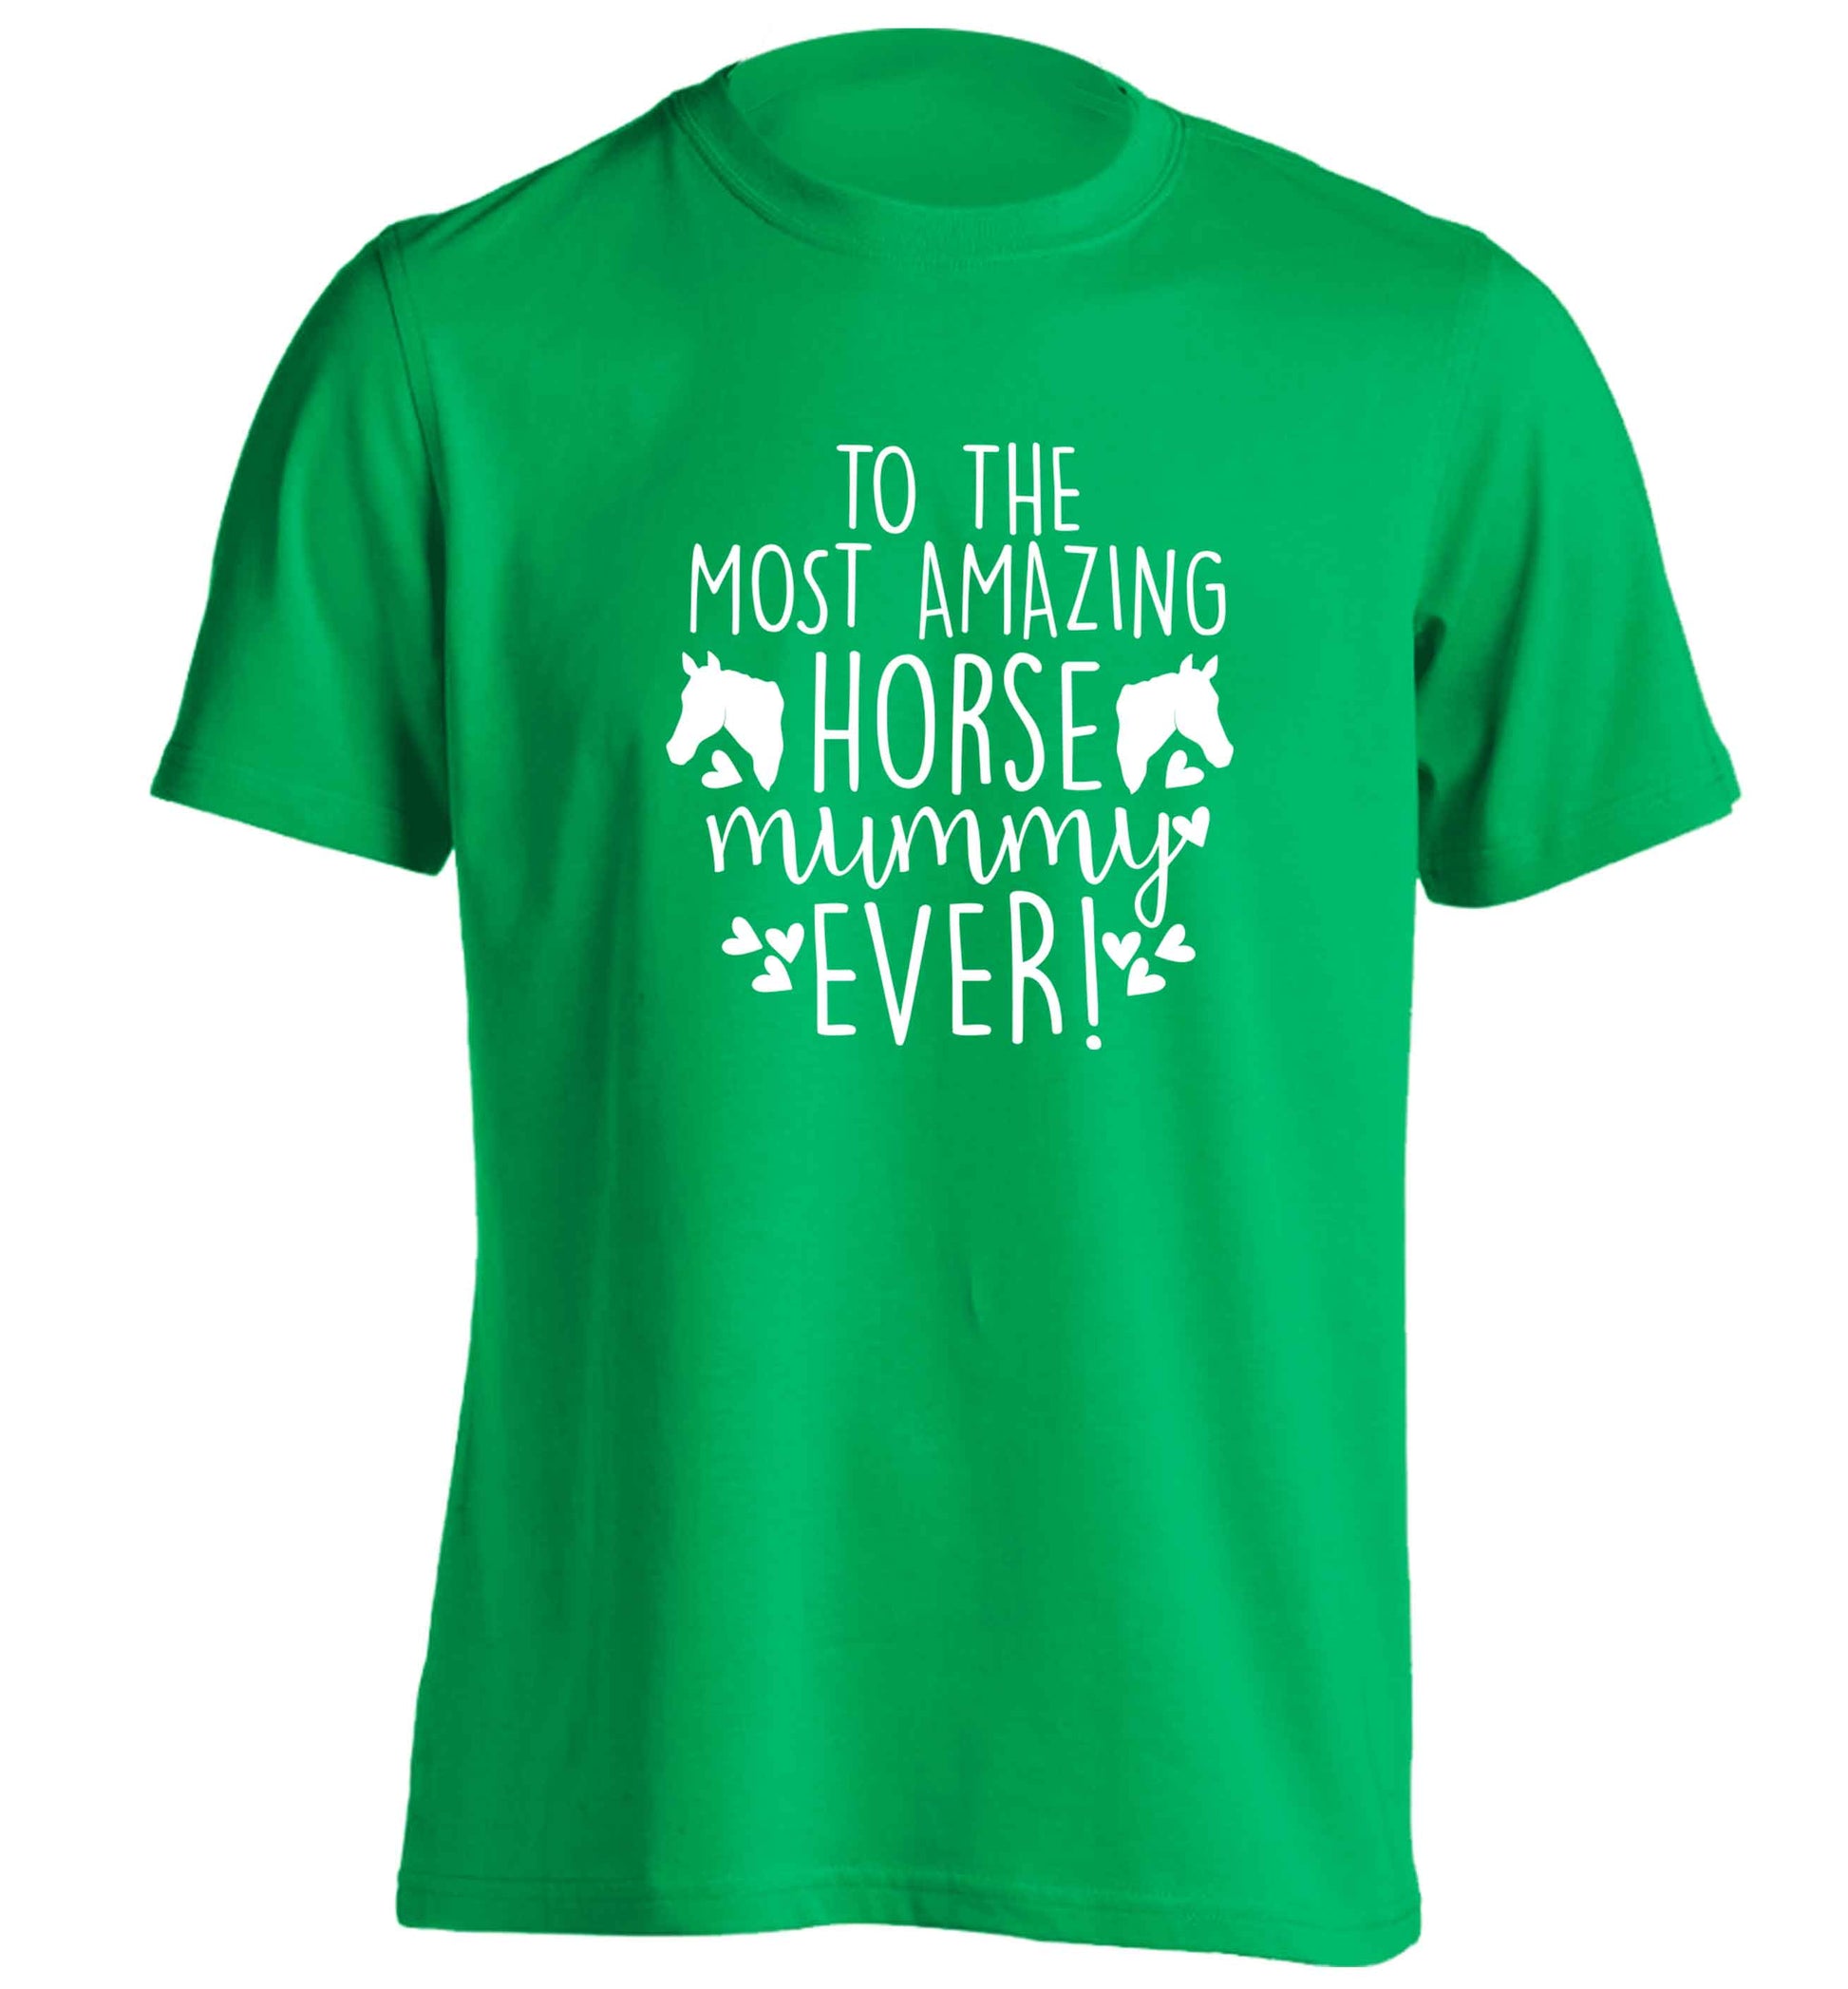 To the most amazing horse mummy ever! adults unisex green Tshirt 2XL